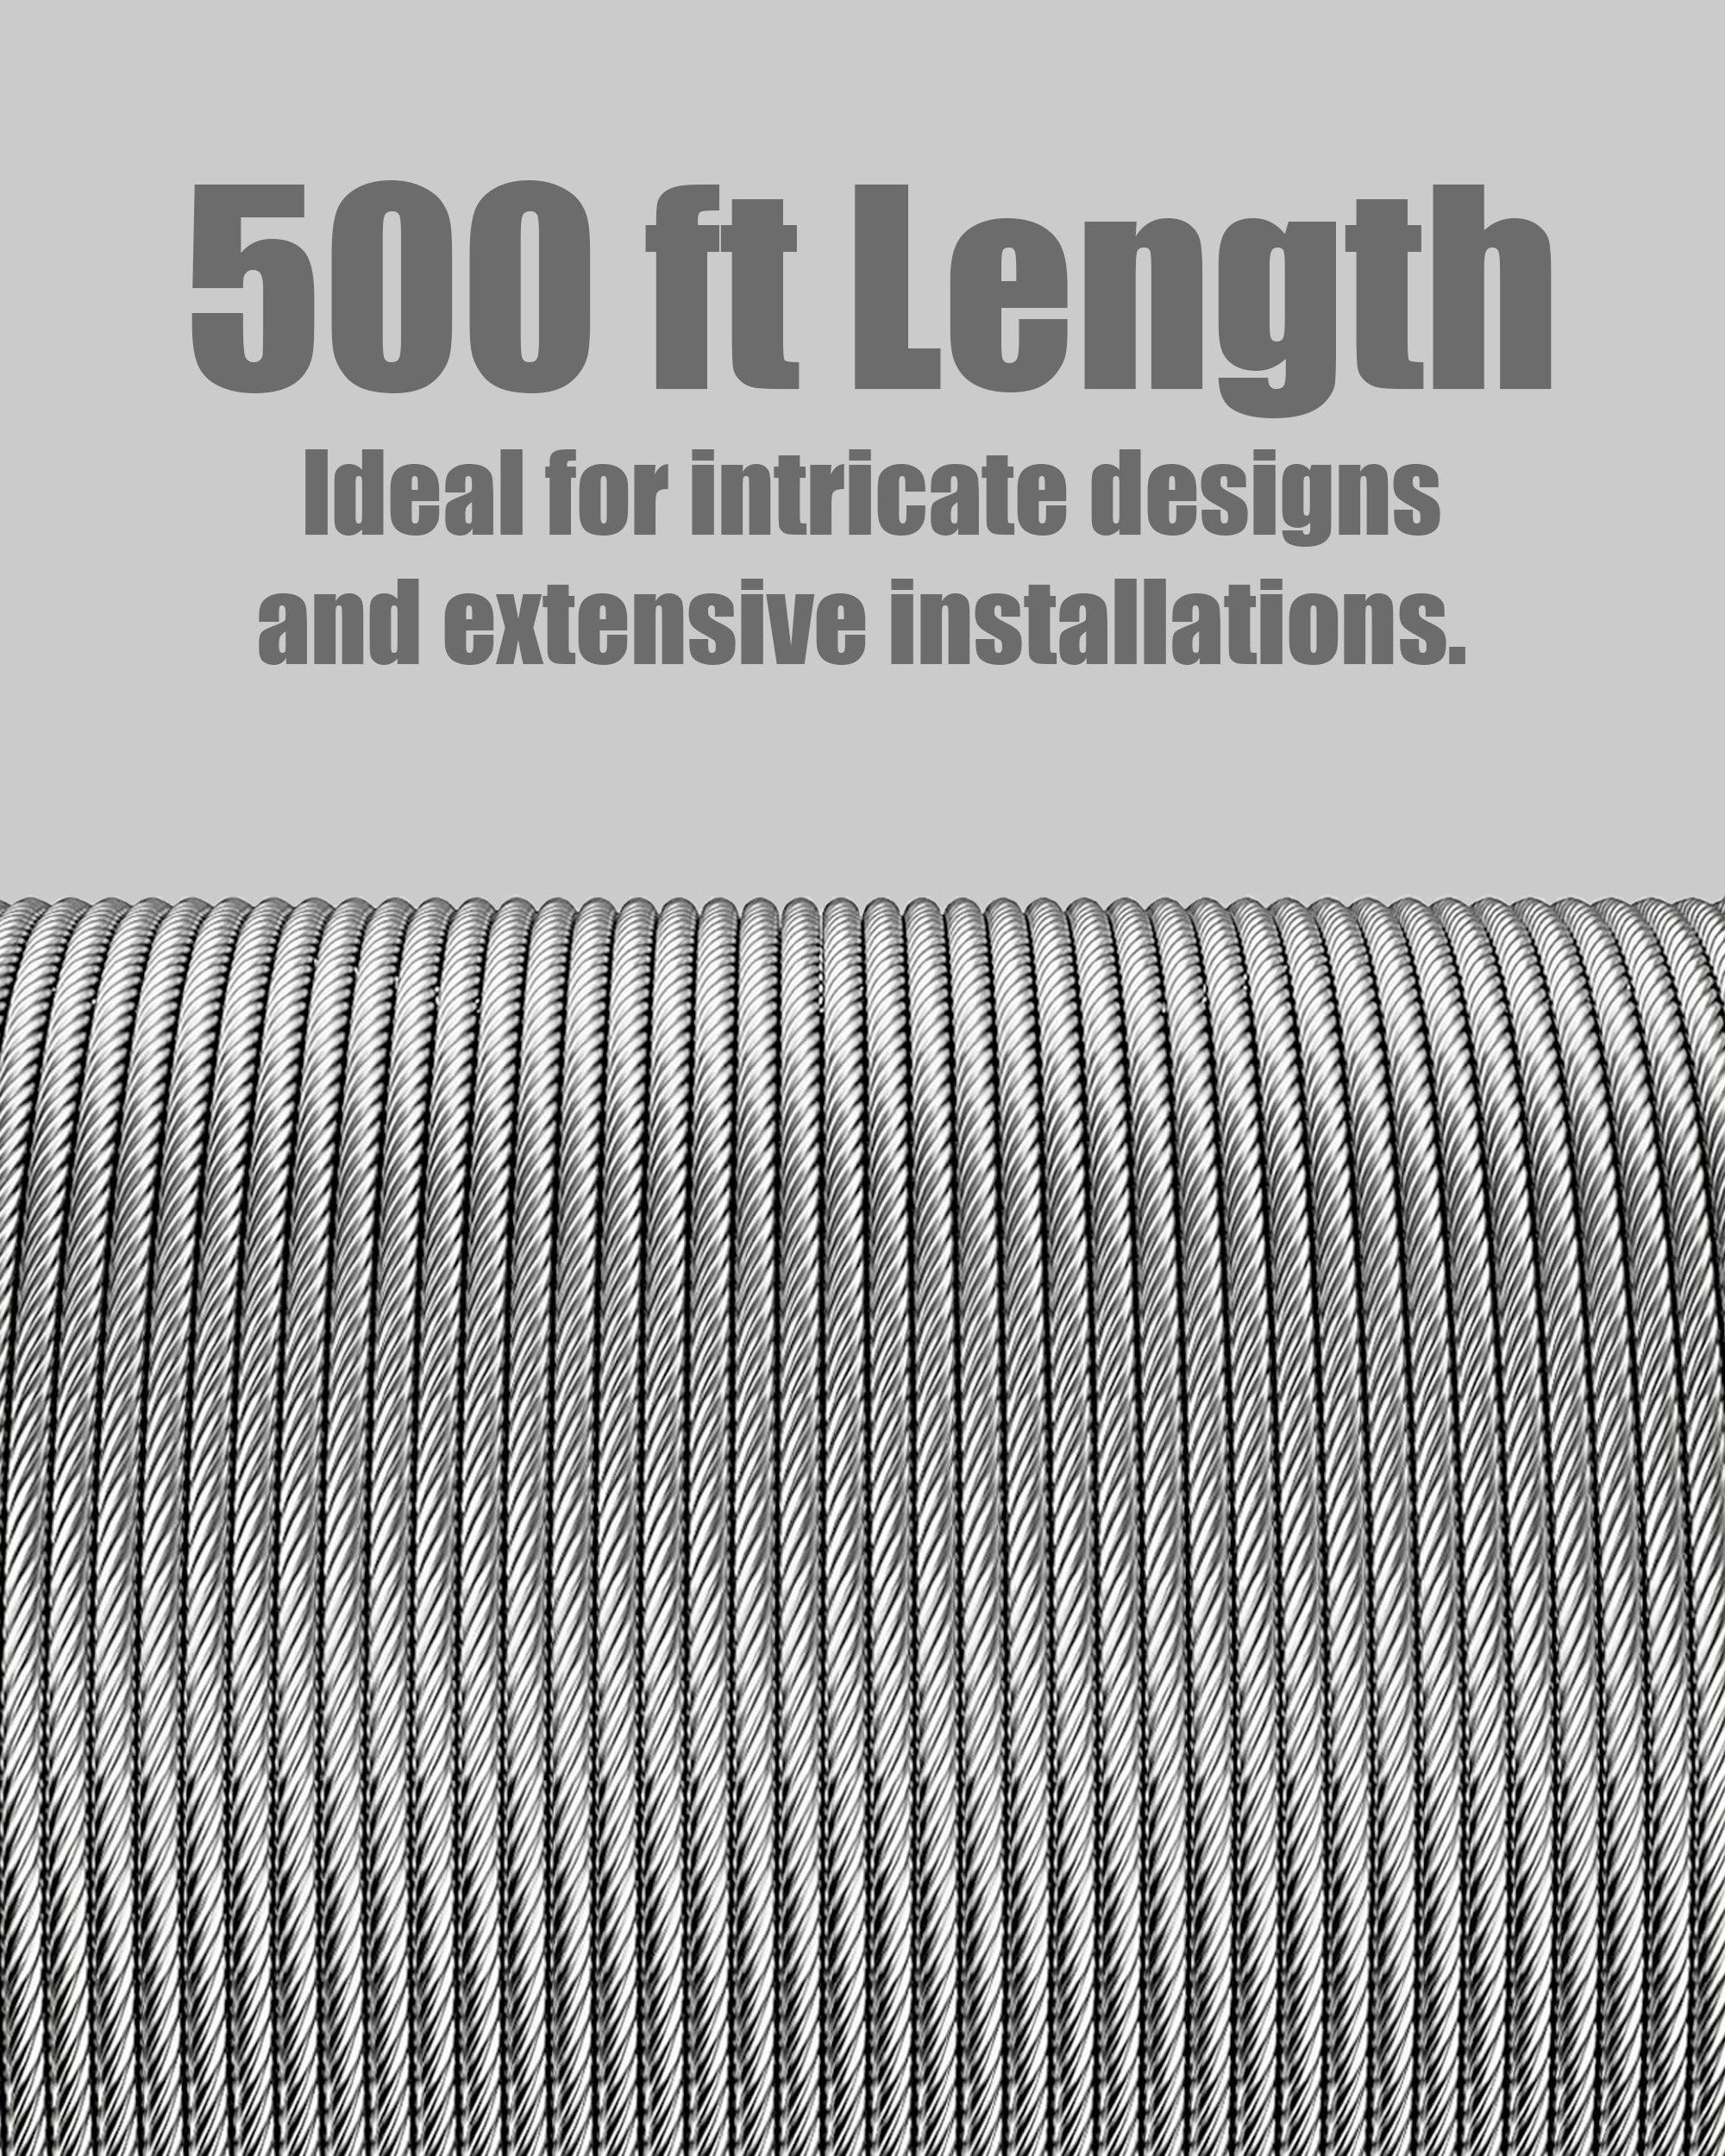 500FT 1/8 inch Cable 7x7 Strands Construction Braided Stainless Wire Premium 316 Stainless Steel Deck Cable Railing for Outdoor, DIY Metal Wire Railing, Balustrades Projects